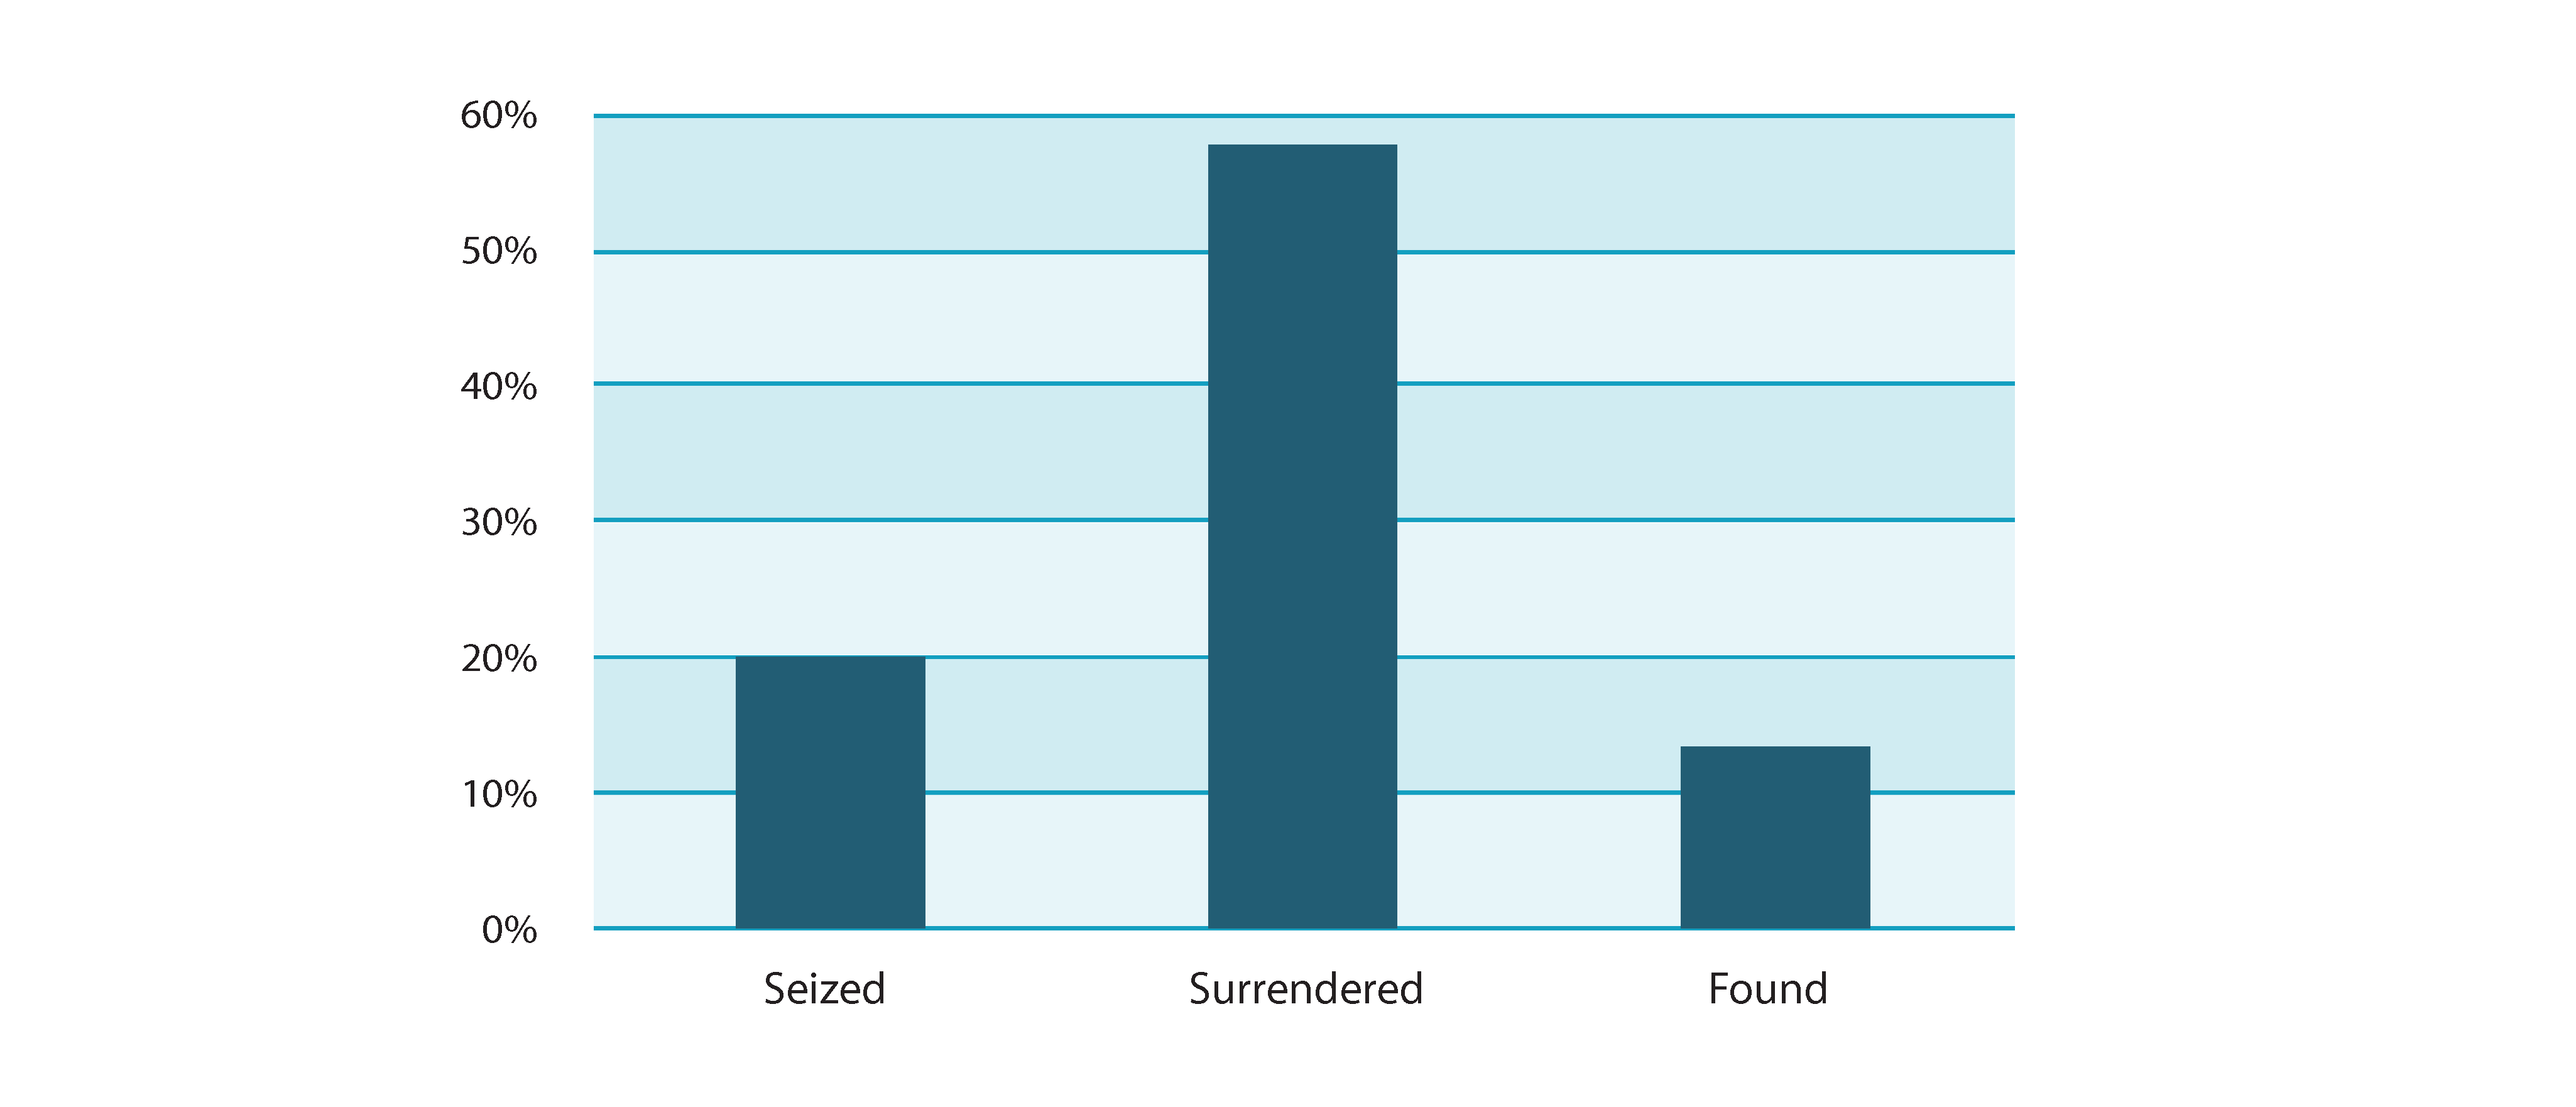 Bar graph indicating percentage of arms seized, surrendered and found.